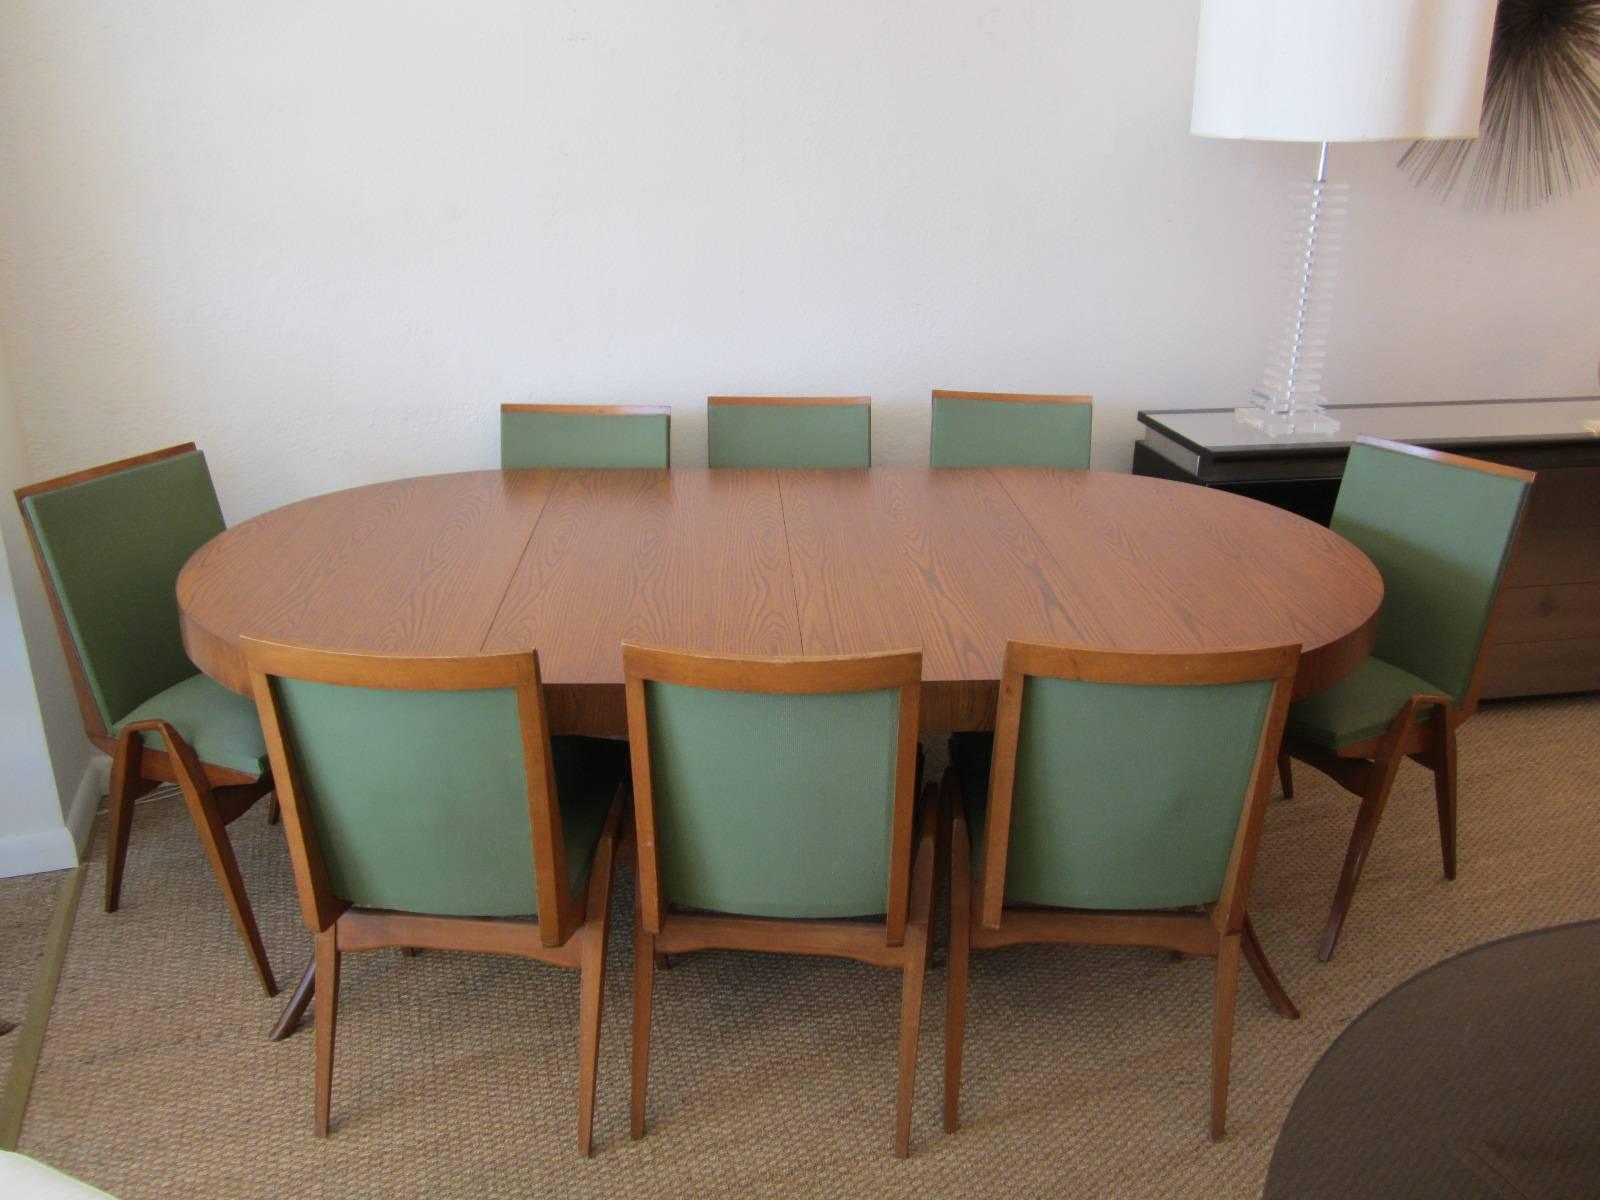 Gorgeous flared leg dining table shown with the two leaves already in place. The table is a perfect circle without the leaves and can be used as a small dinette or as a center table, see images. Designed by T. H. Robsjohn-Gibbings for John Widdicomb